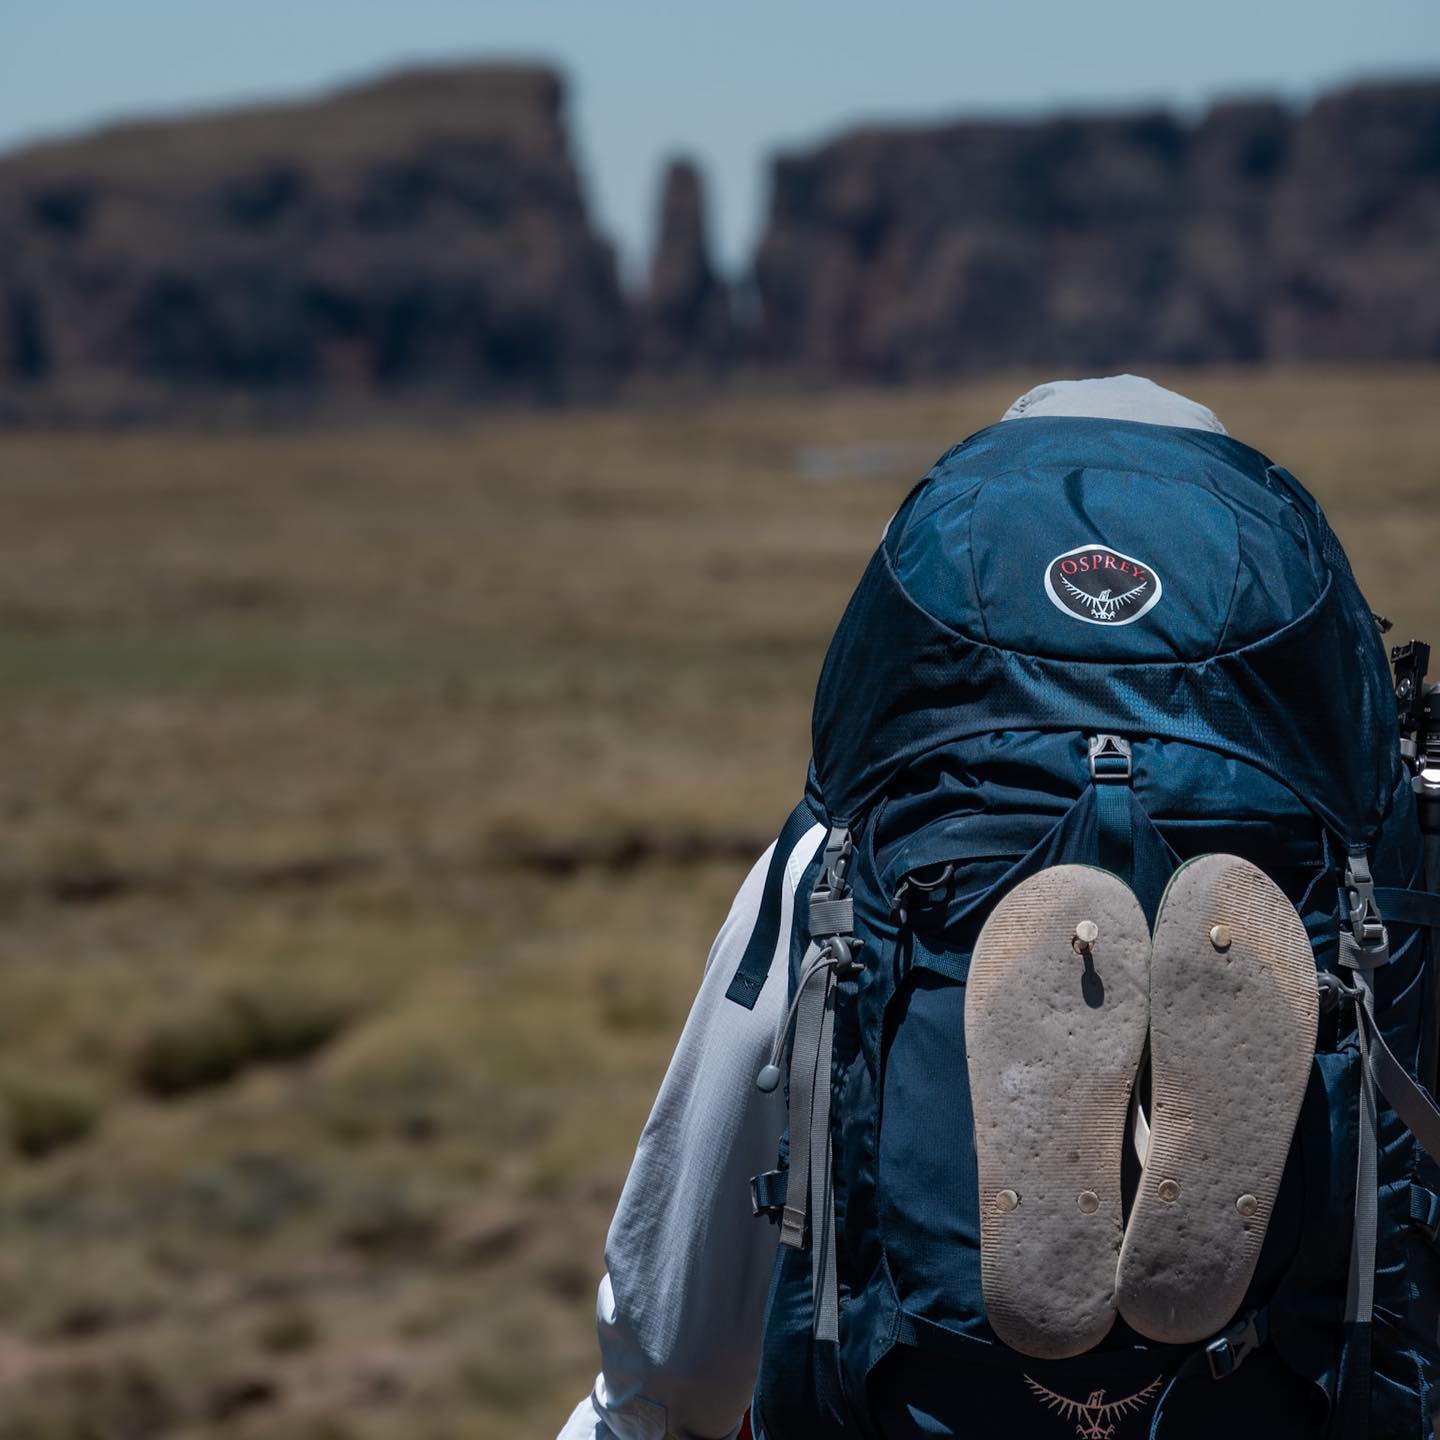 A successful hike is always going to be best if you are prepared. check out our The Ultimate Guide to Choosing the Perfect Hiking Backpack